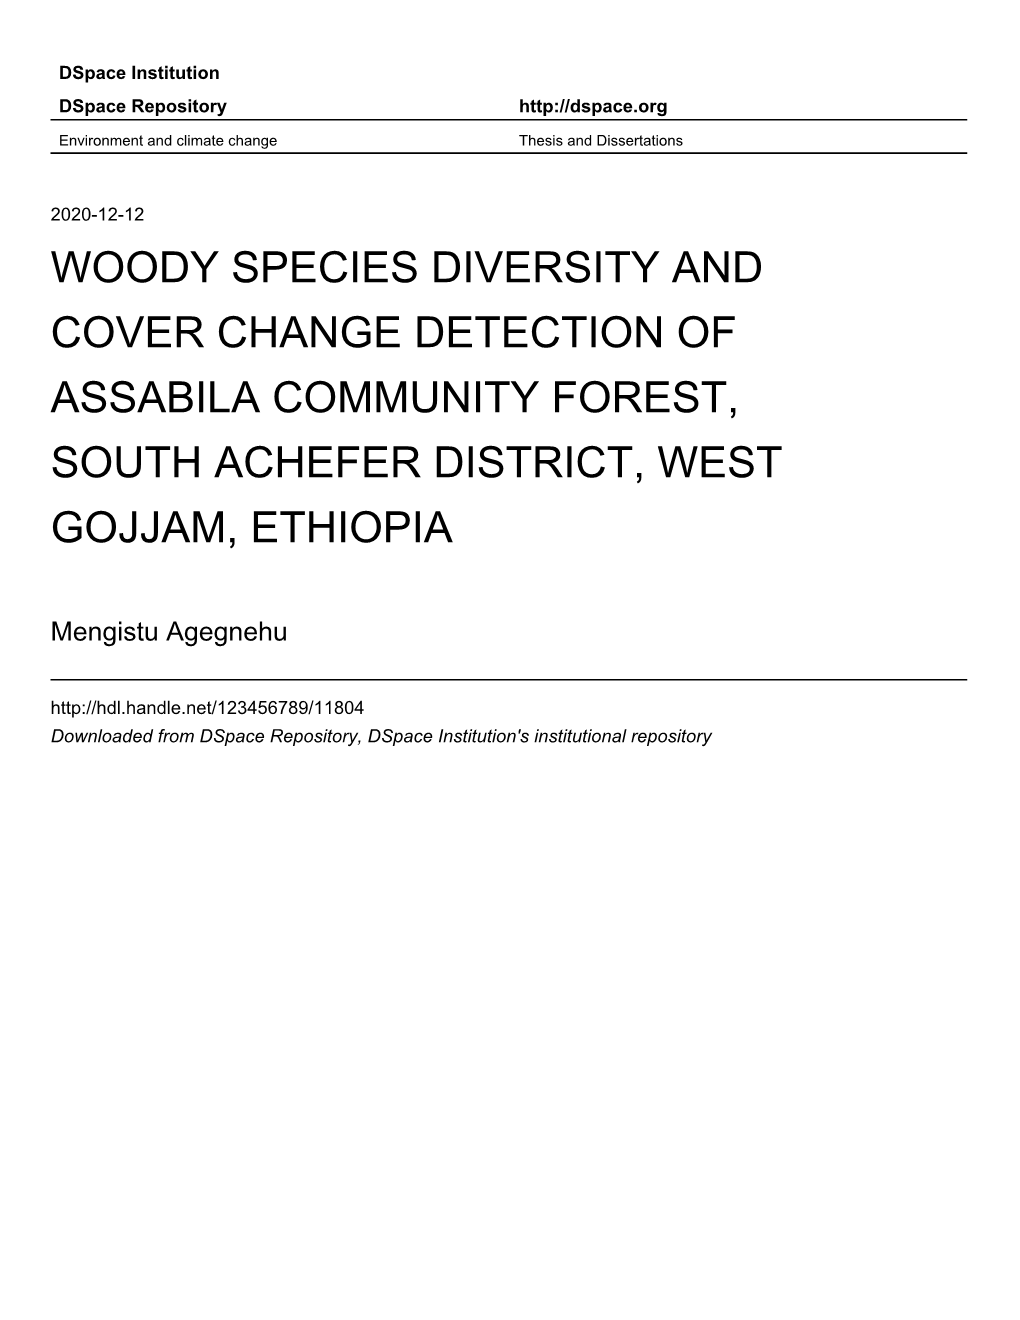 Woody Species Diversity and Cover Change Detection of Assabila Community Forest, South Achefer District, West Gojjam, Ethiopia